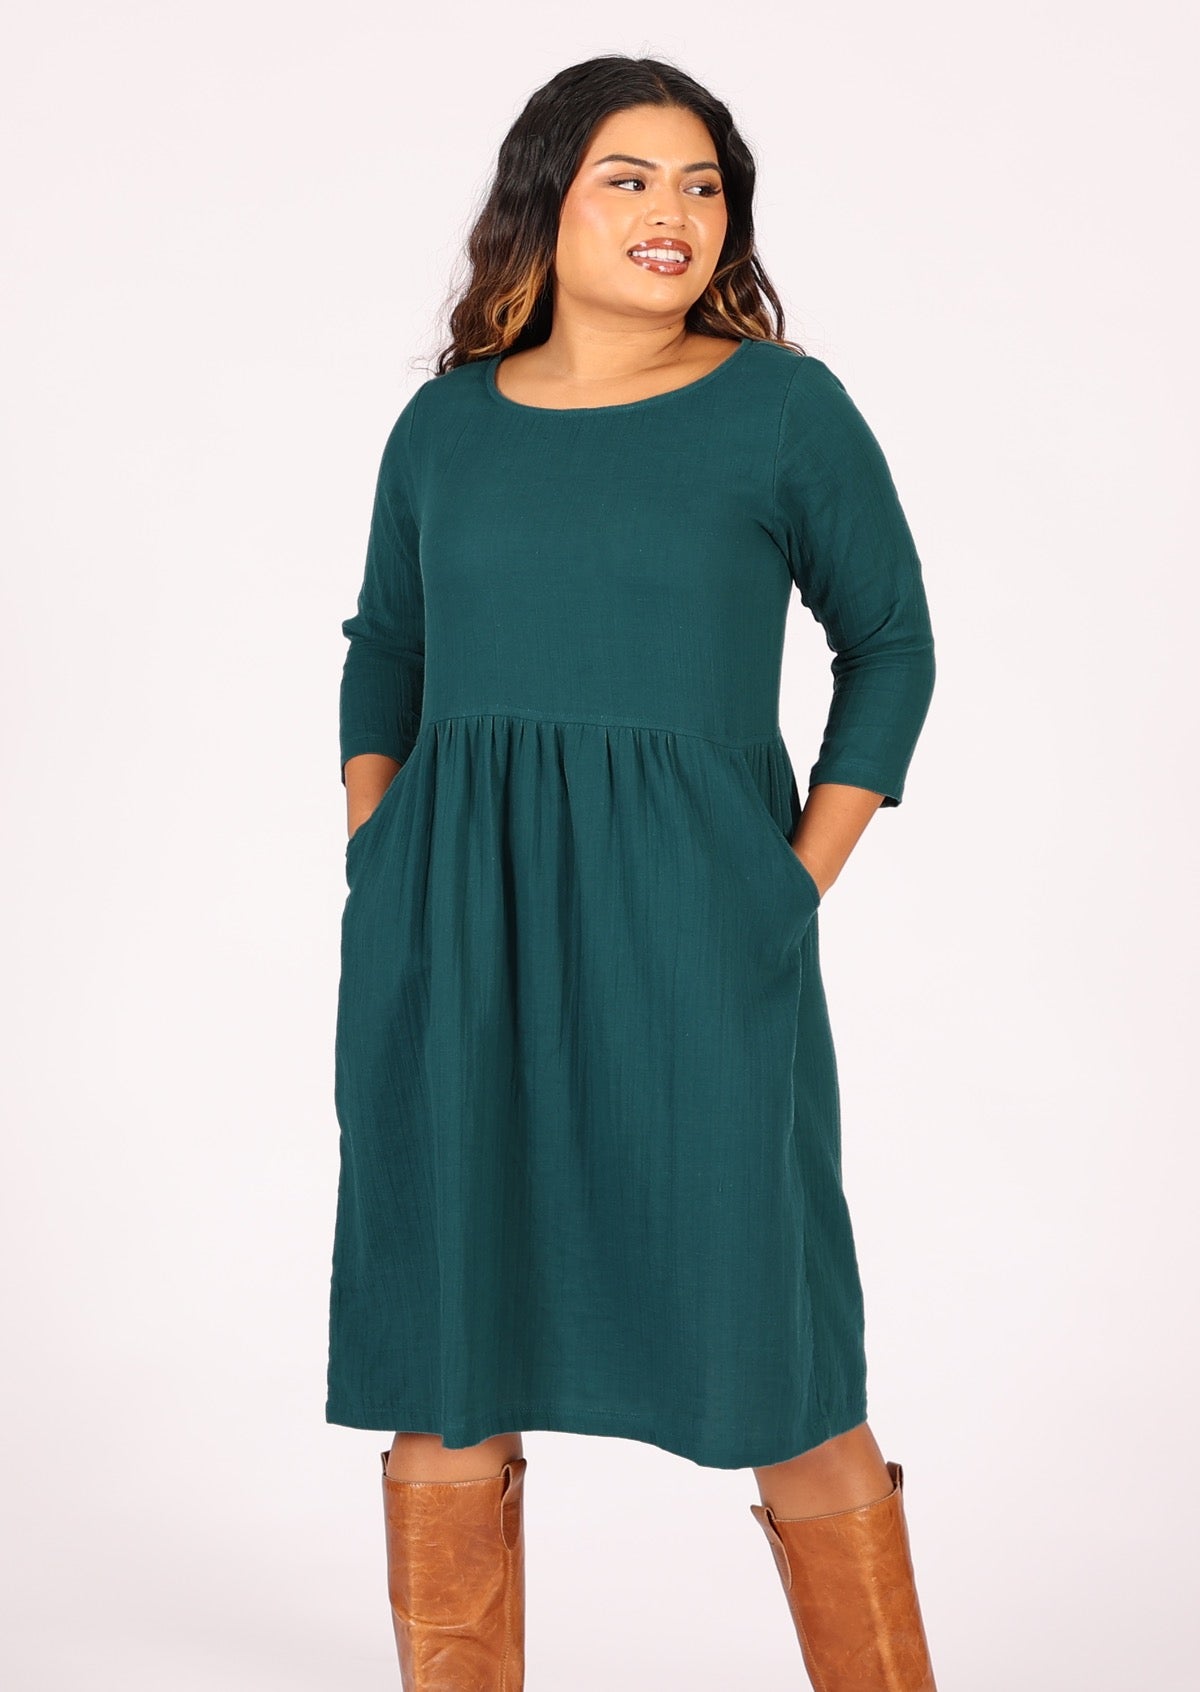 Double cotton dress with round neckline and 3/4 sleeves